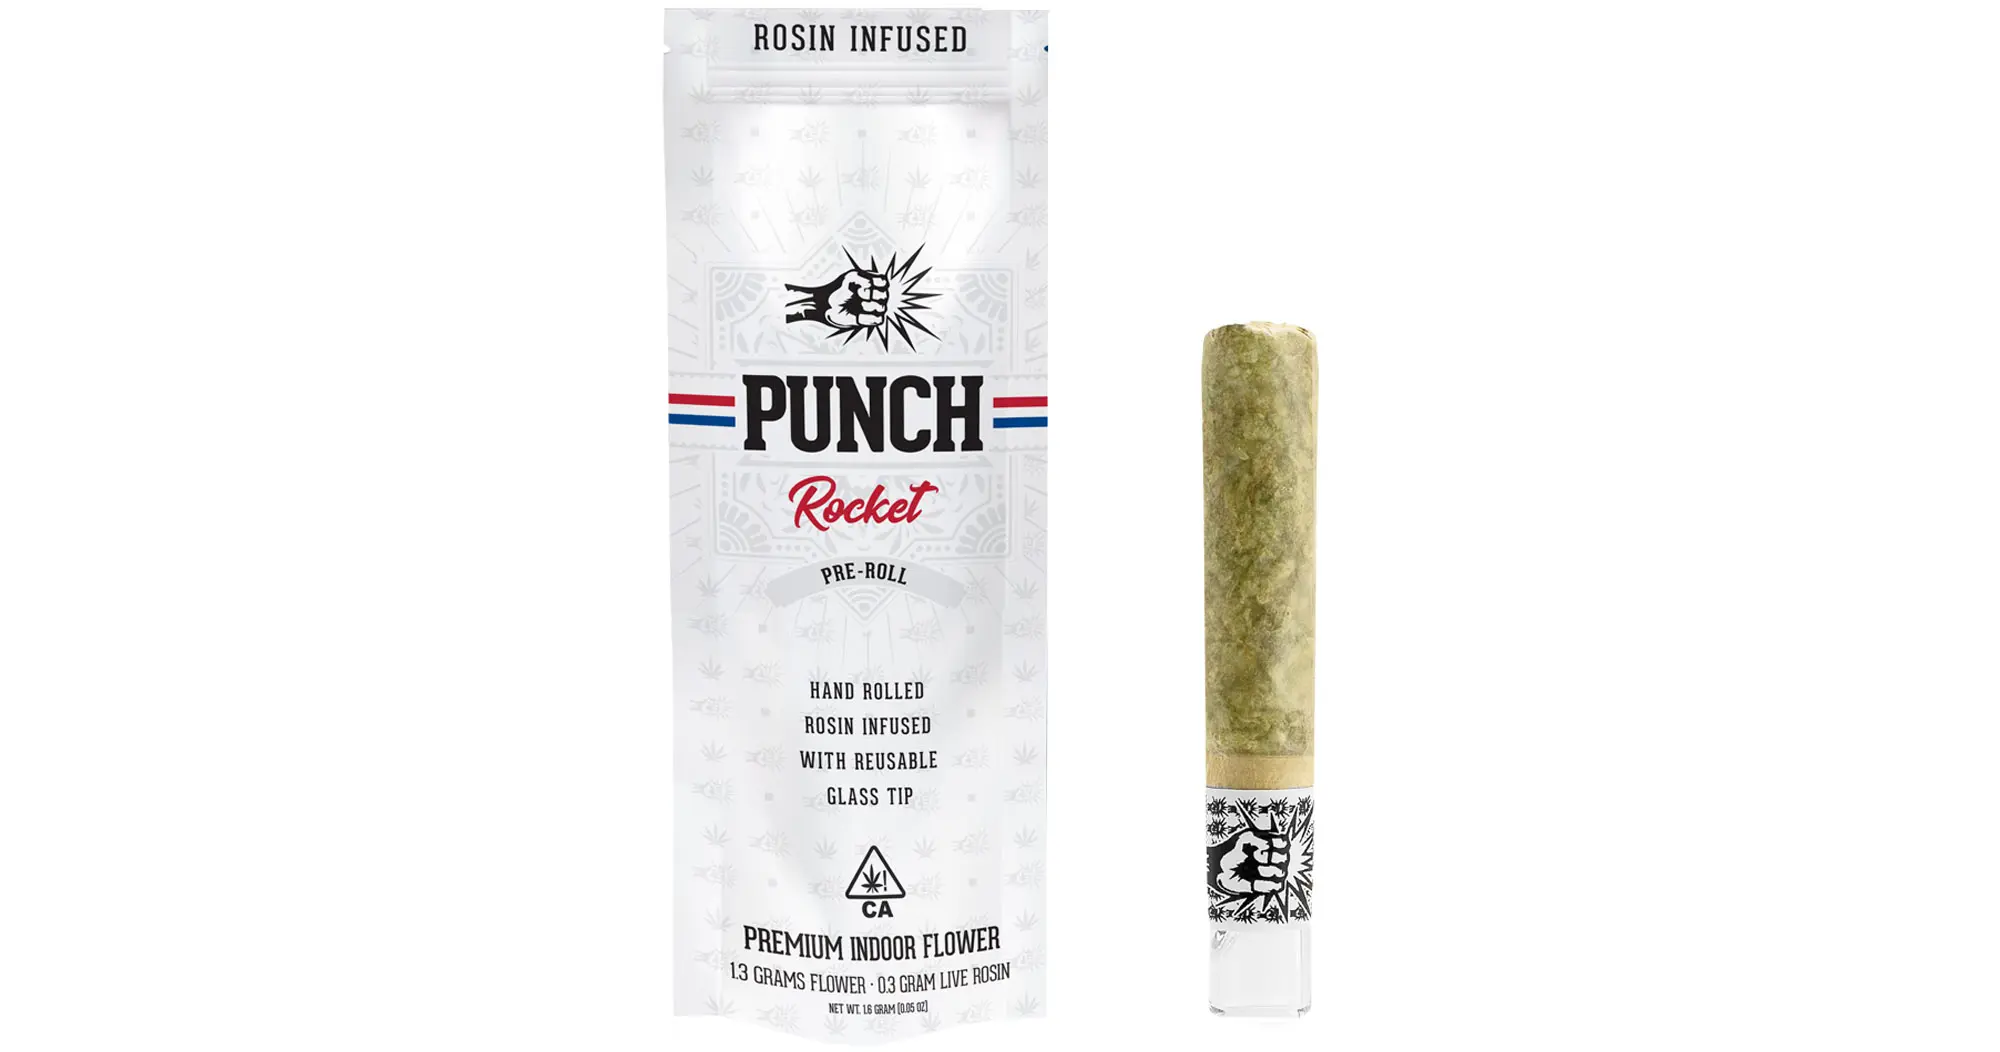 White Gummies x Governmint Oasis Rosin Infused Rocket Pre-Roll